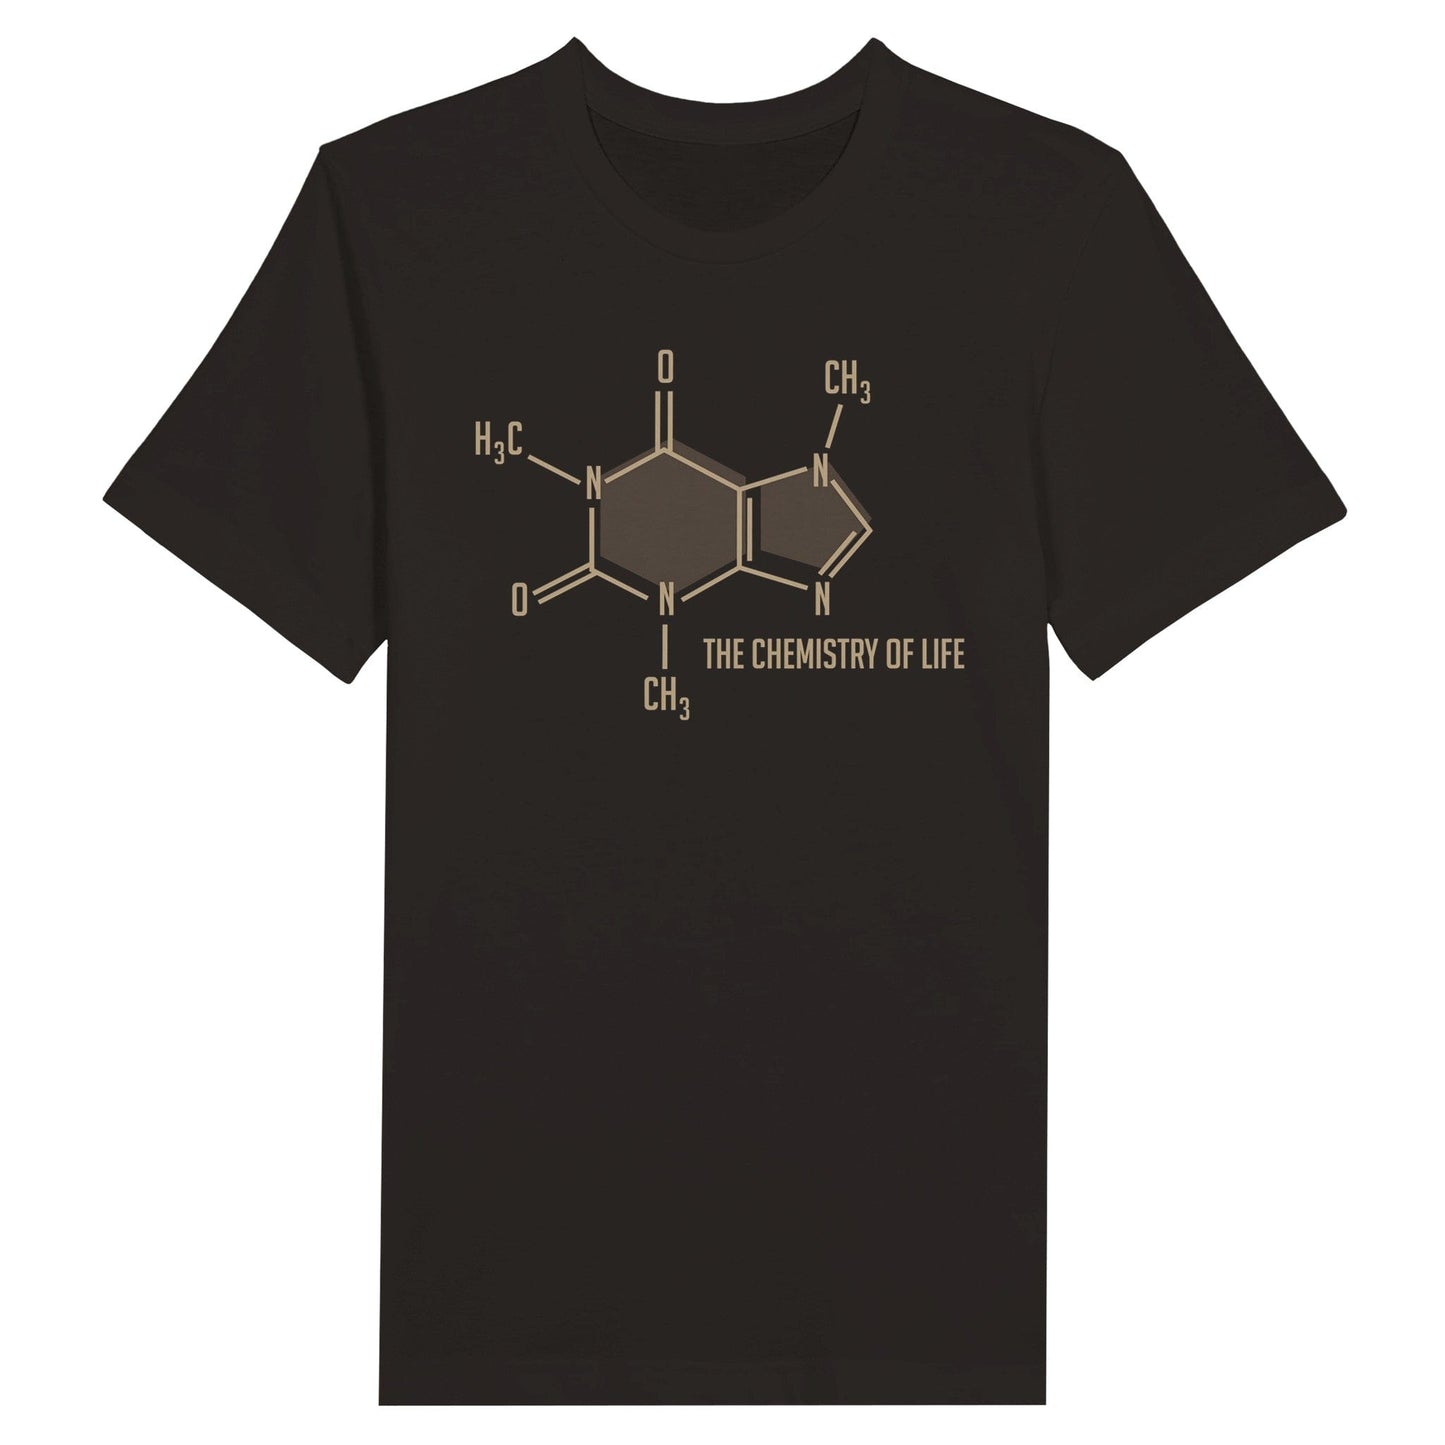 Good Bean Gifts "The Chemistry of Life" Unisex Crewneck T-shirt Black / S